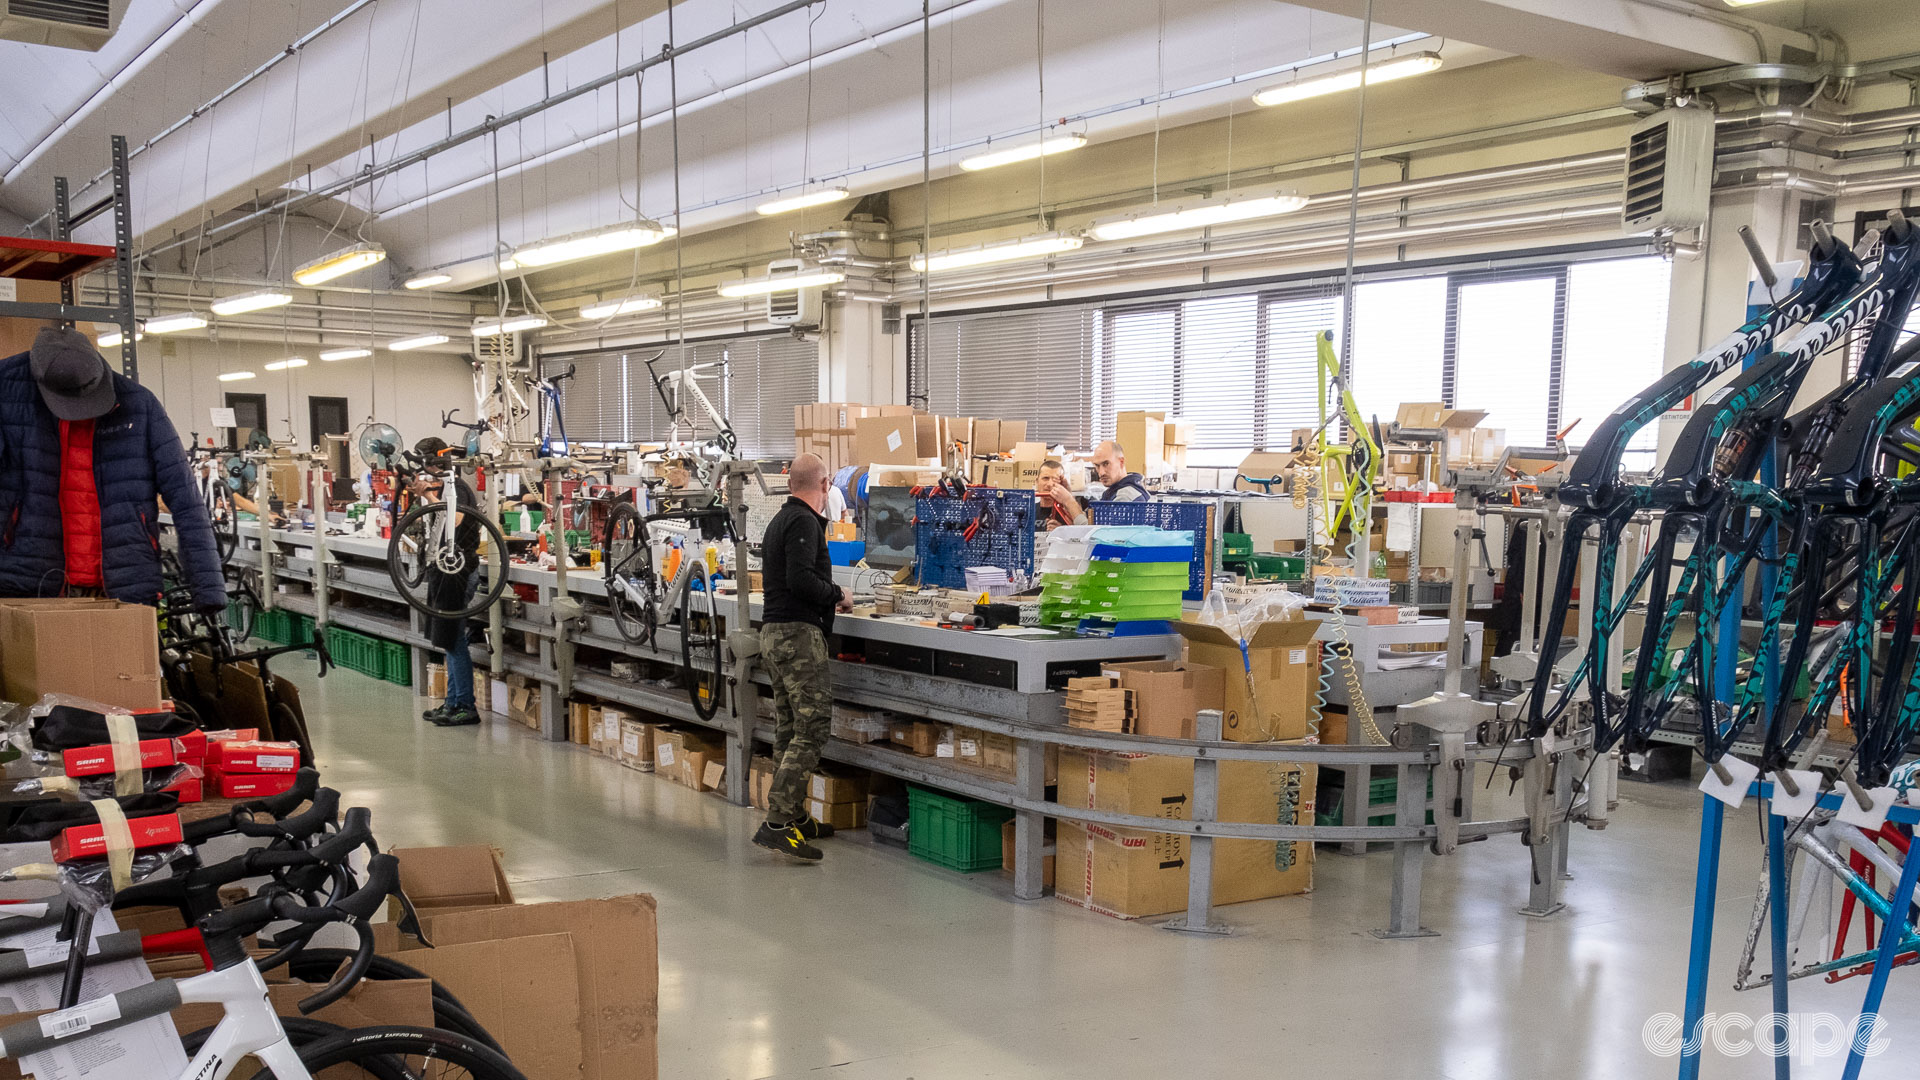 The photo shows a wide shot of Wilier's assembly line from one corner